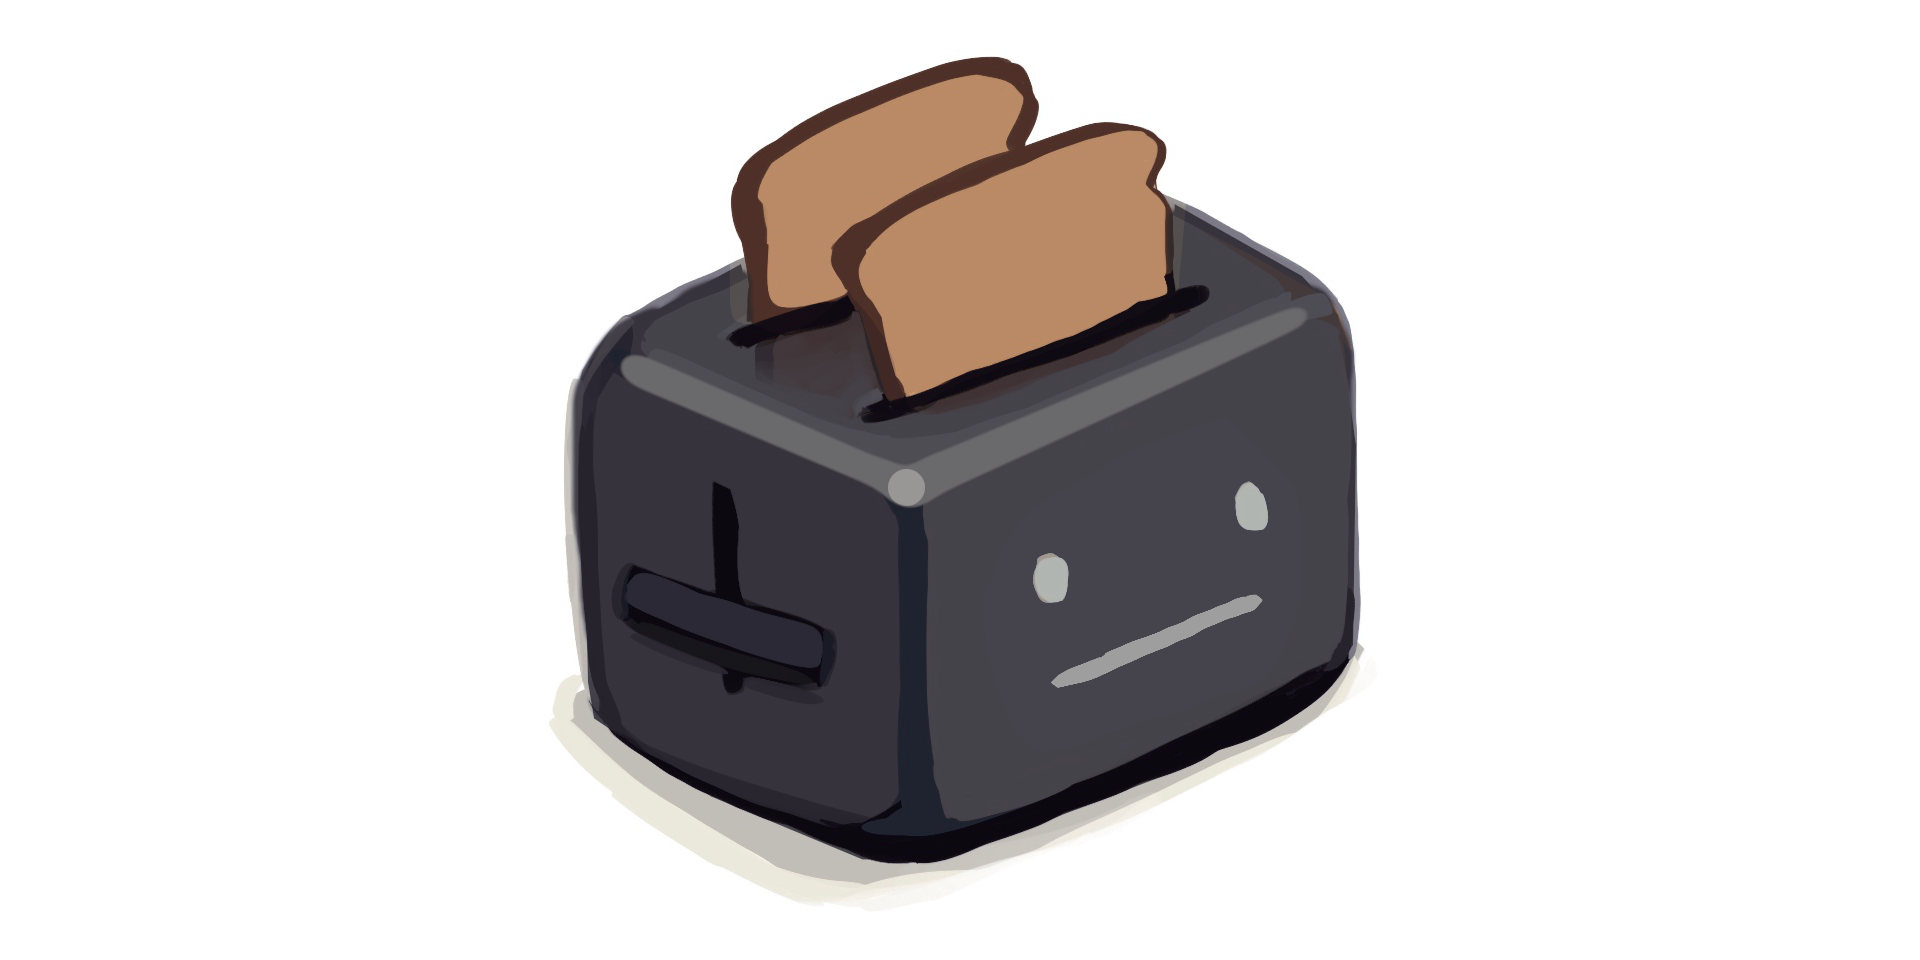 An illustration of Ditto mimicking a toaster.